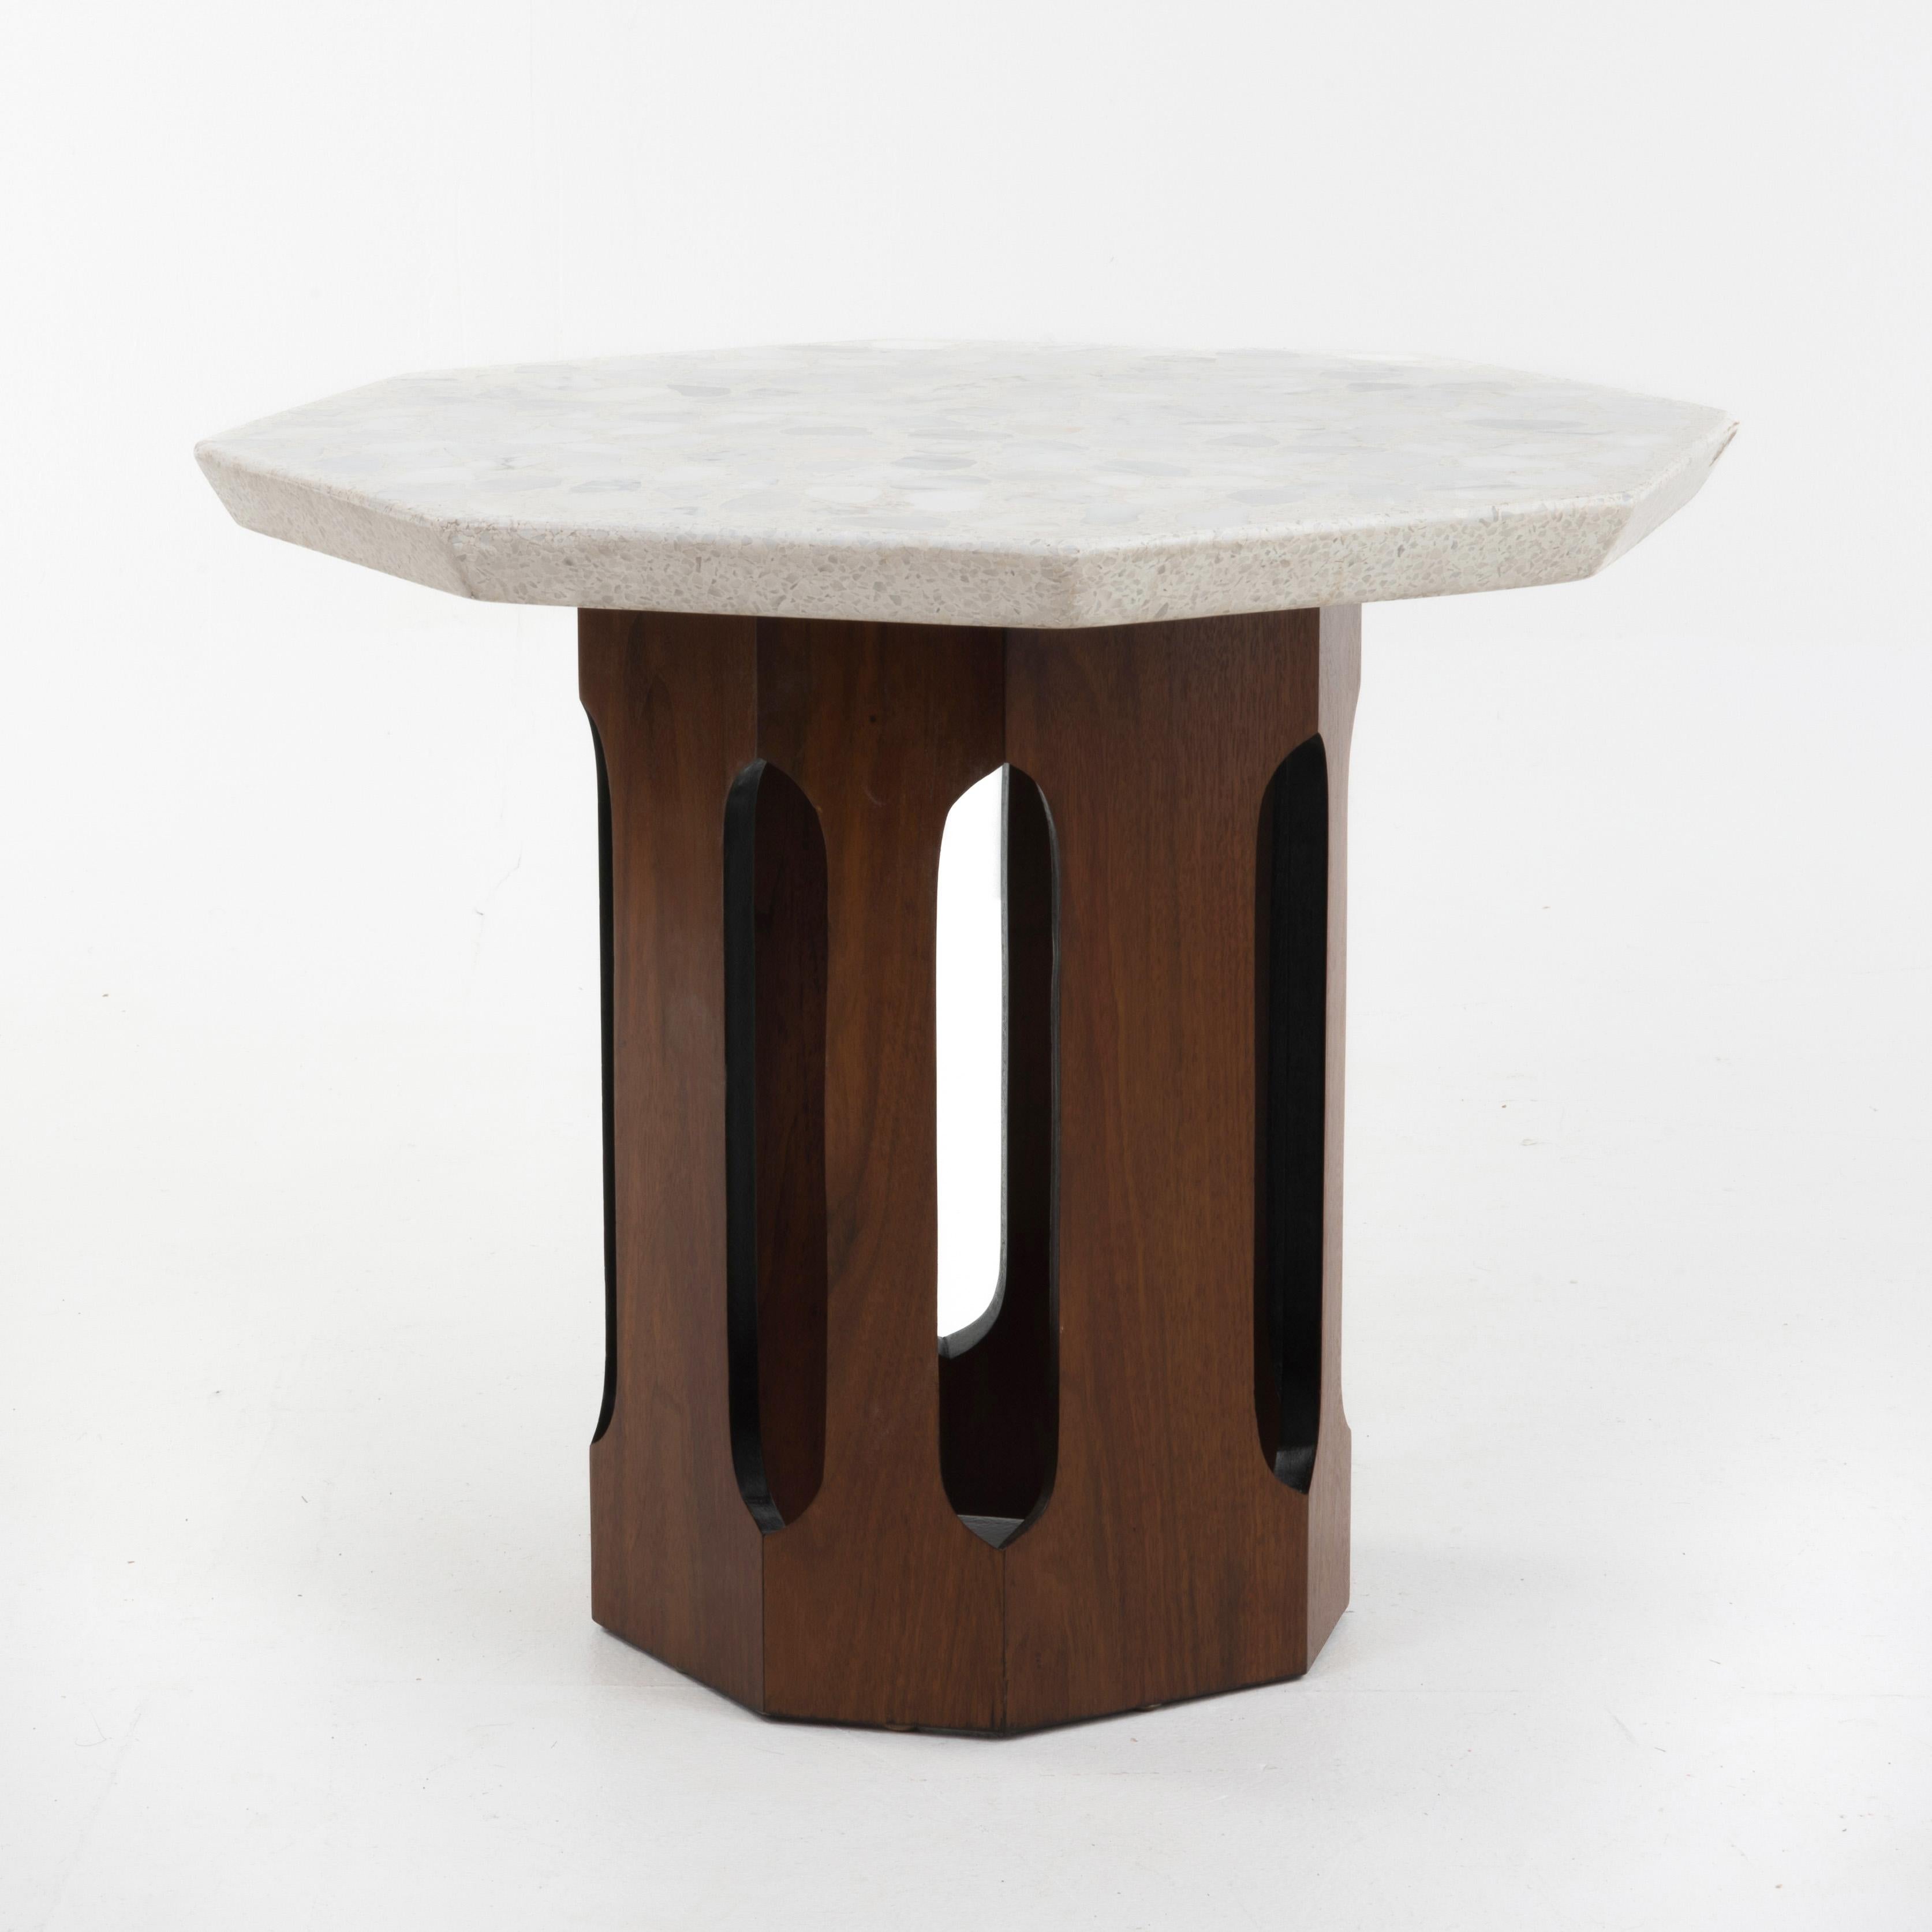 Harvey Probber Terrazzo Travertine Stone Walnut Side Tables Octagon - A Pair In Good Condition For Sale In Forest Grove, PA